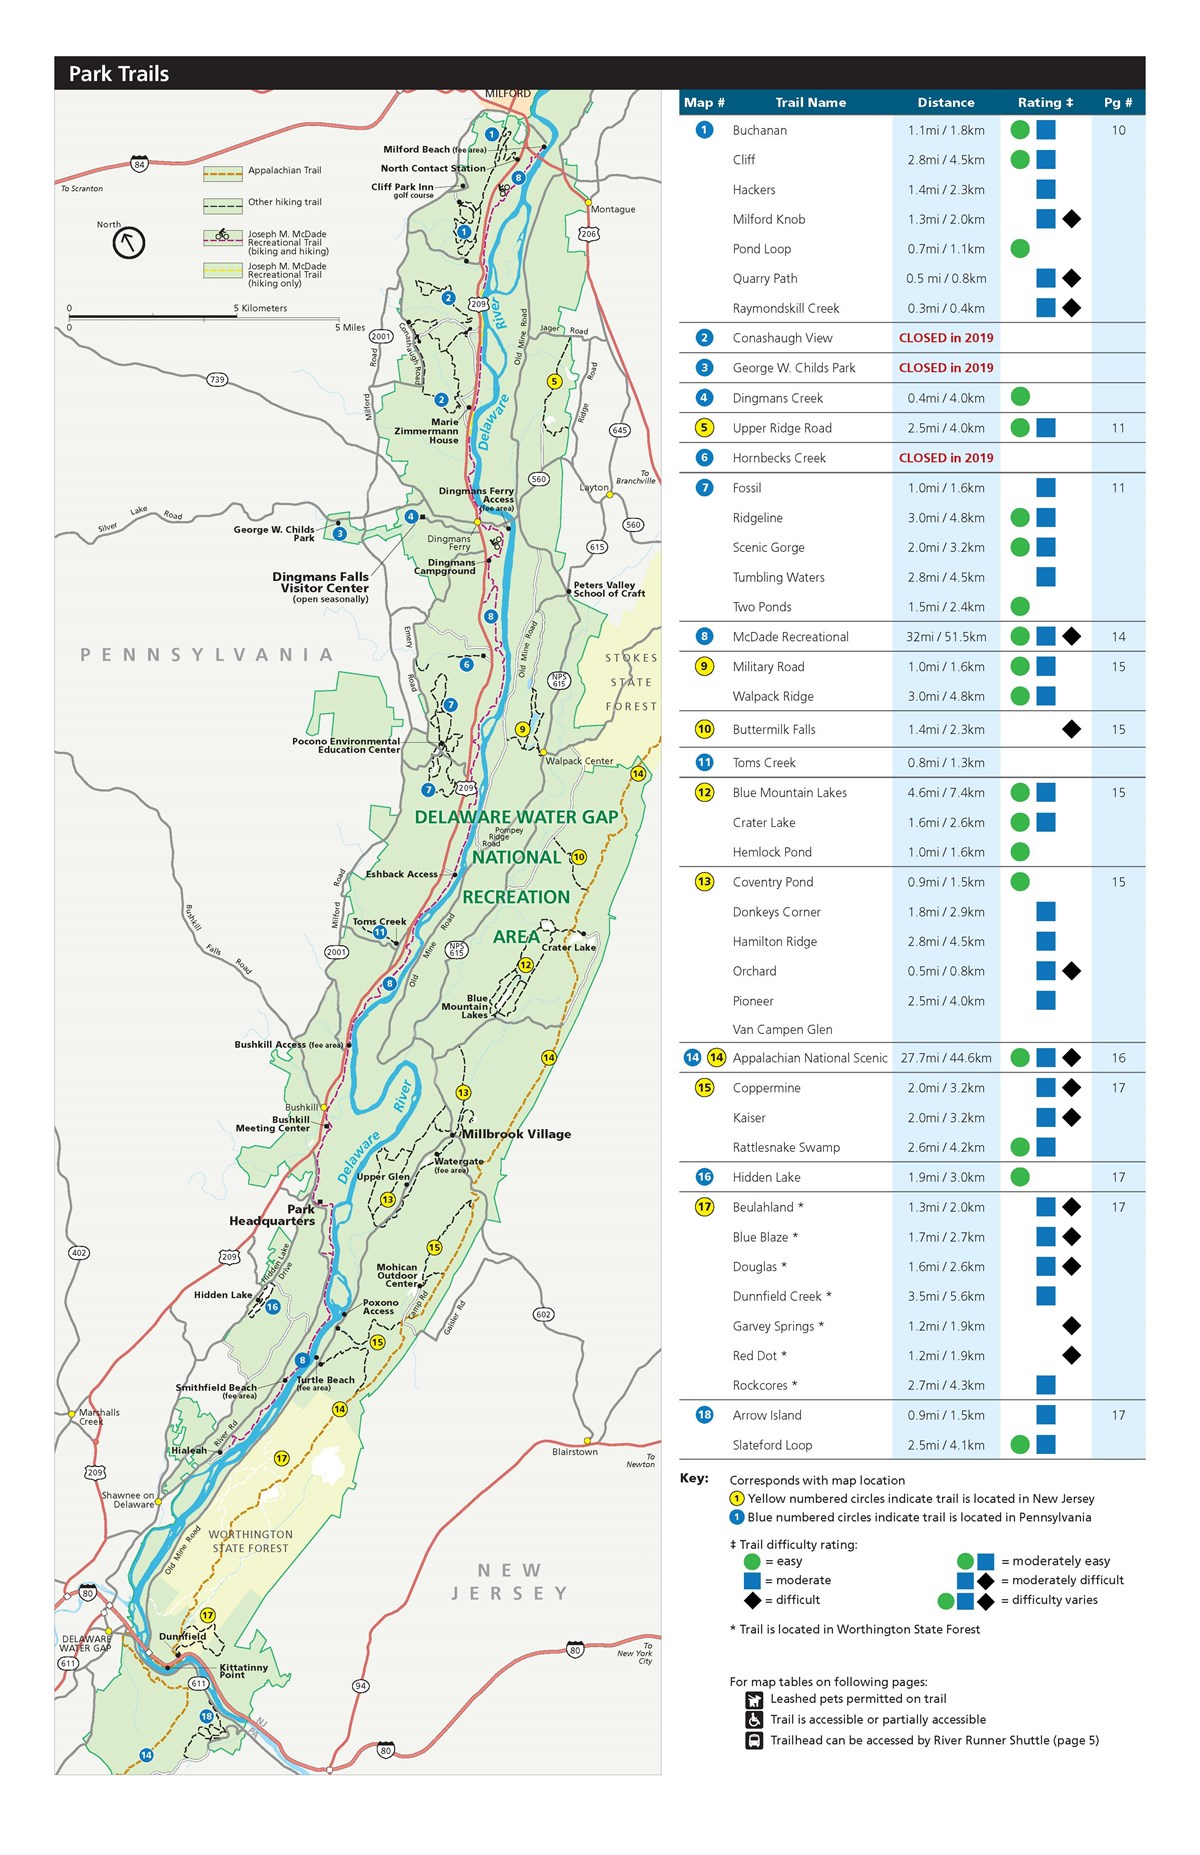 Map of park trails displays various trail locations within the Delaware Water Gap National Recreation Area.